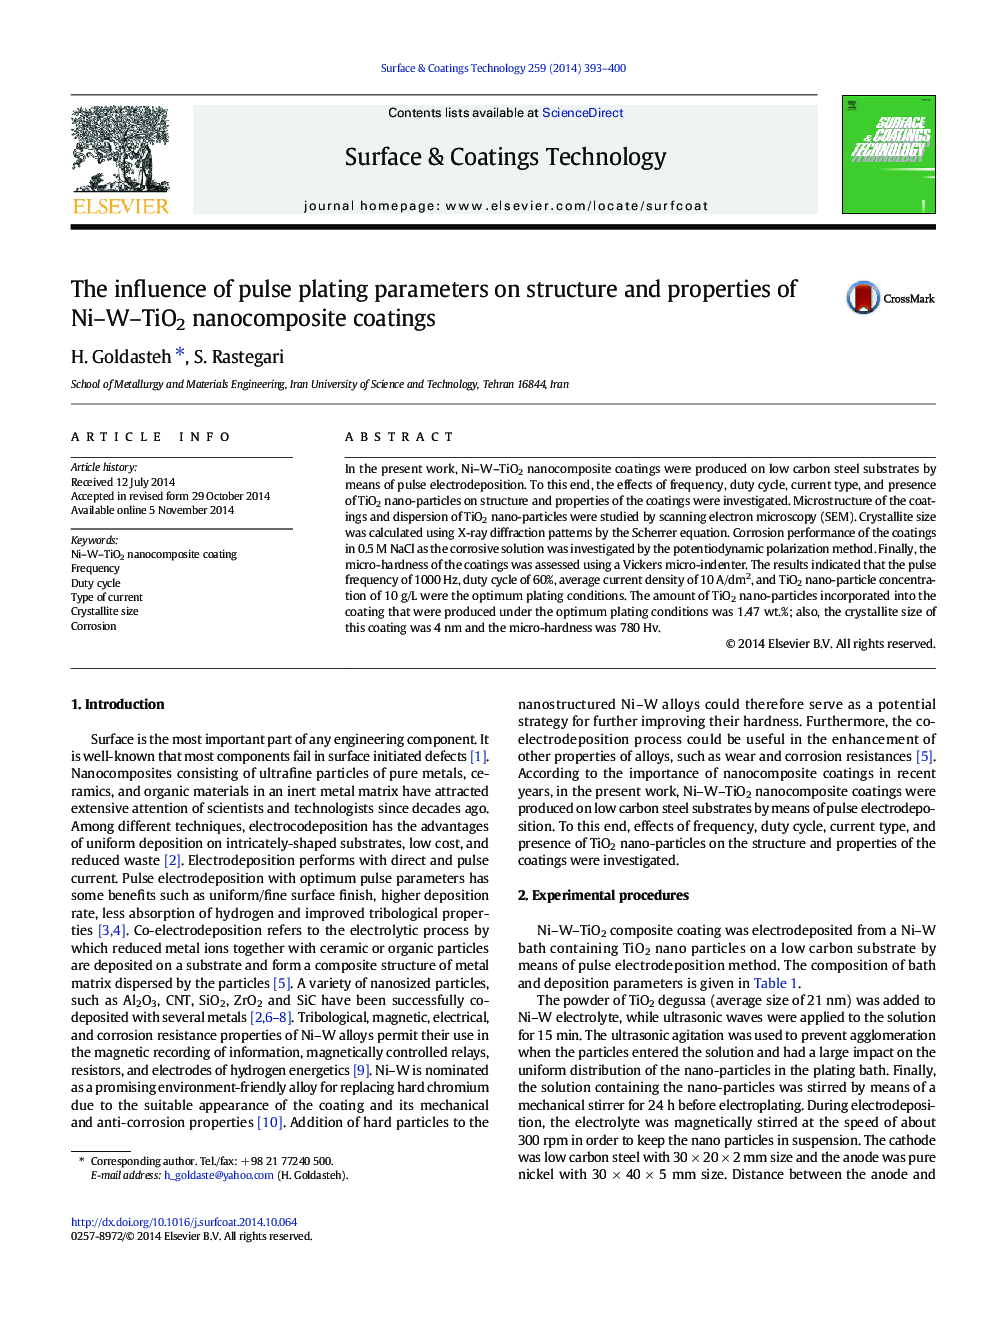 The influence of pulse plating parameters on structure and properties of Ni-W-TiO2 nanocomposite coatings